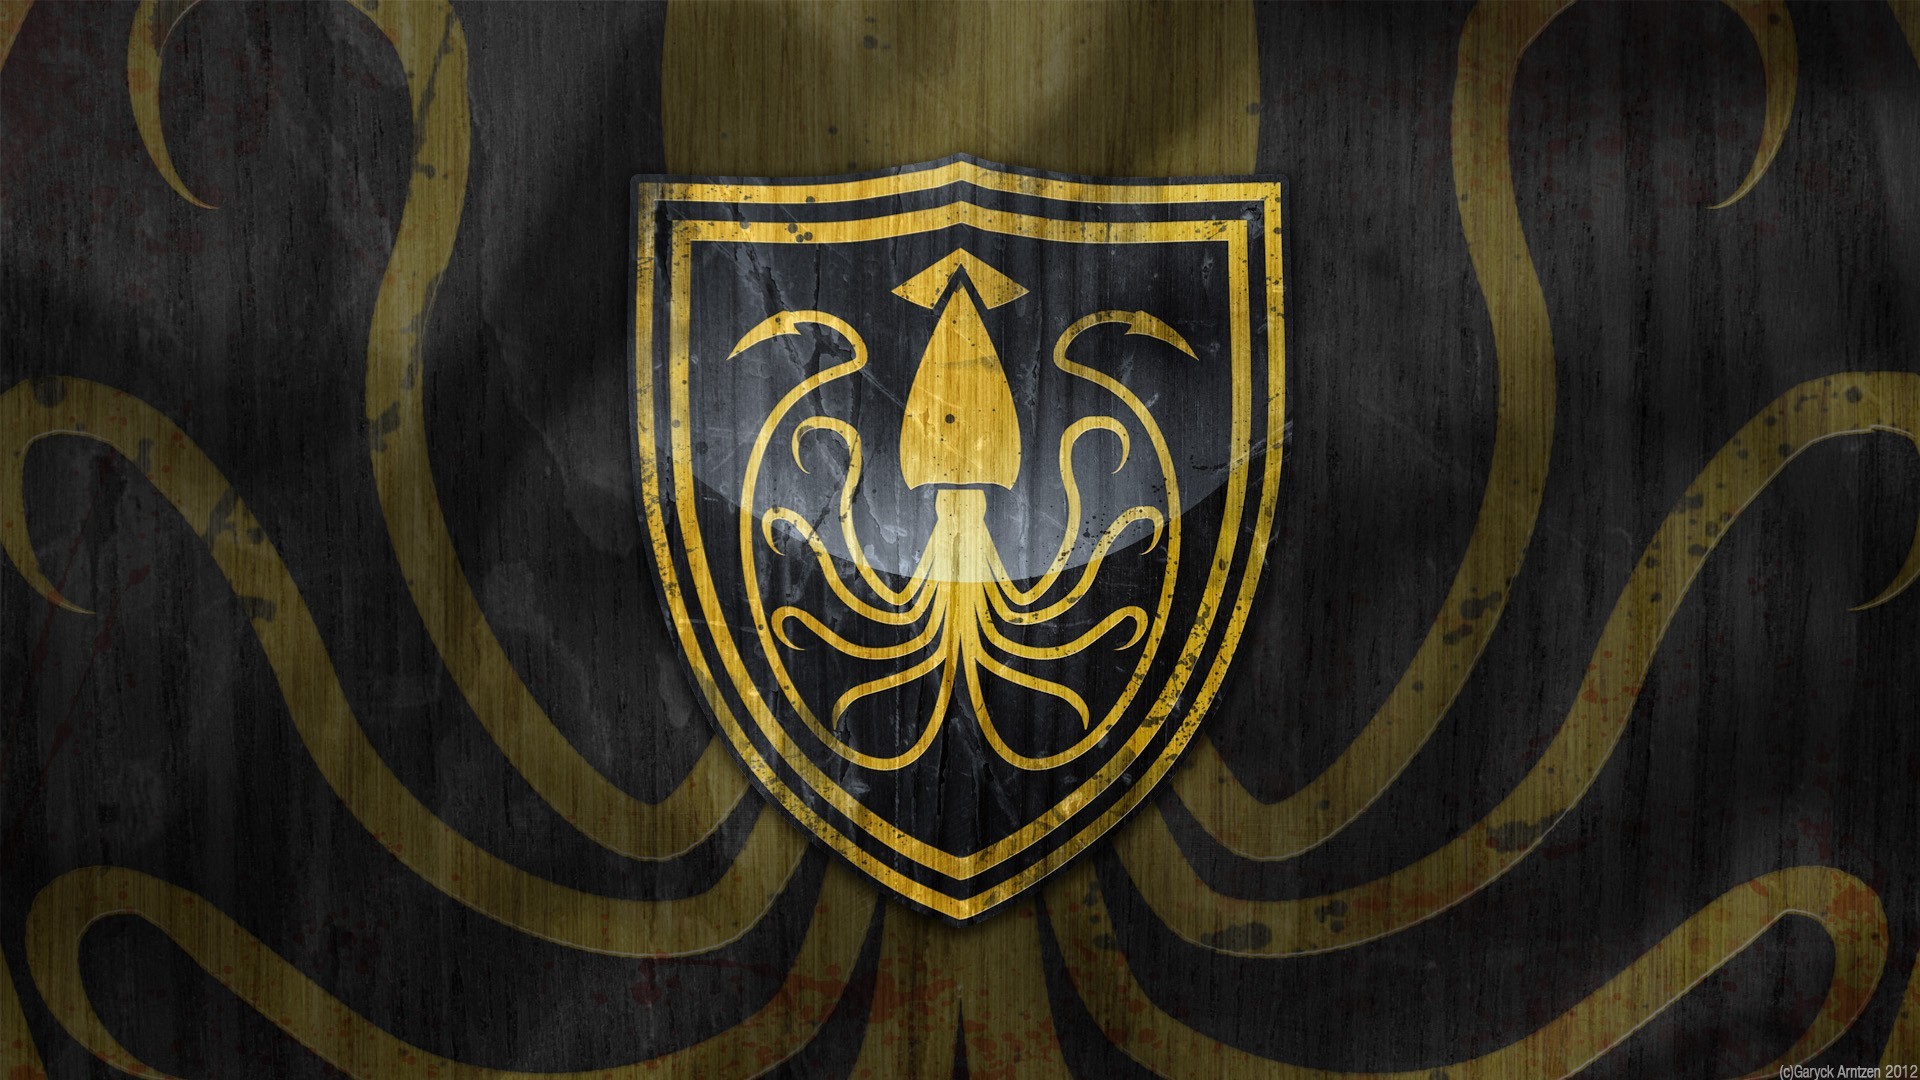 Game of Thrones: A Telltale Games Series, Shields, A Song of Ice and Fire, House Greyjoy Wallpaper